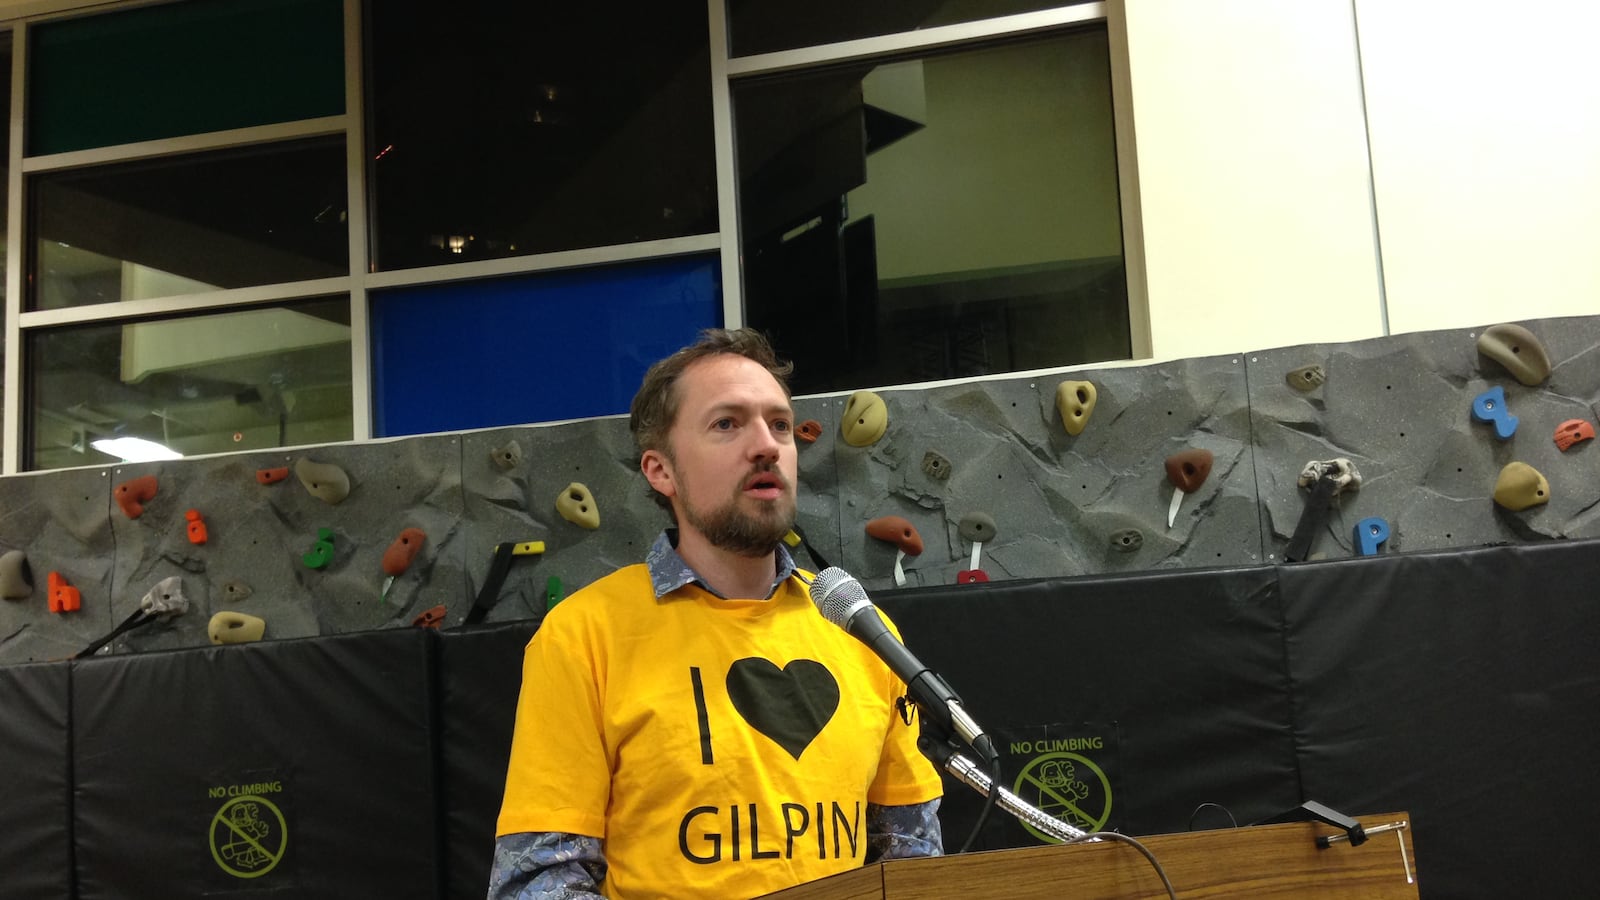 A Gilpin supporter addresses the school board before the closure vote in December.